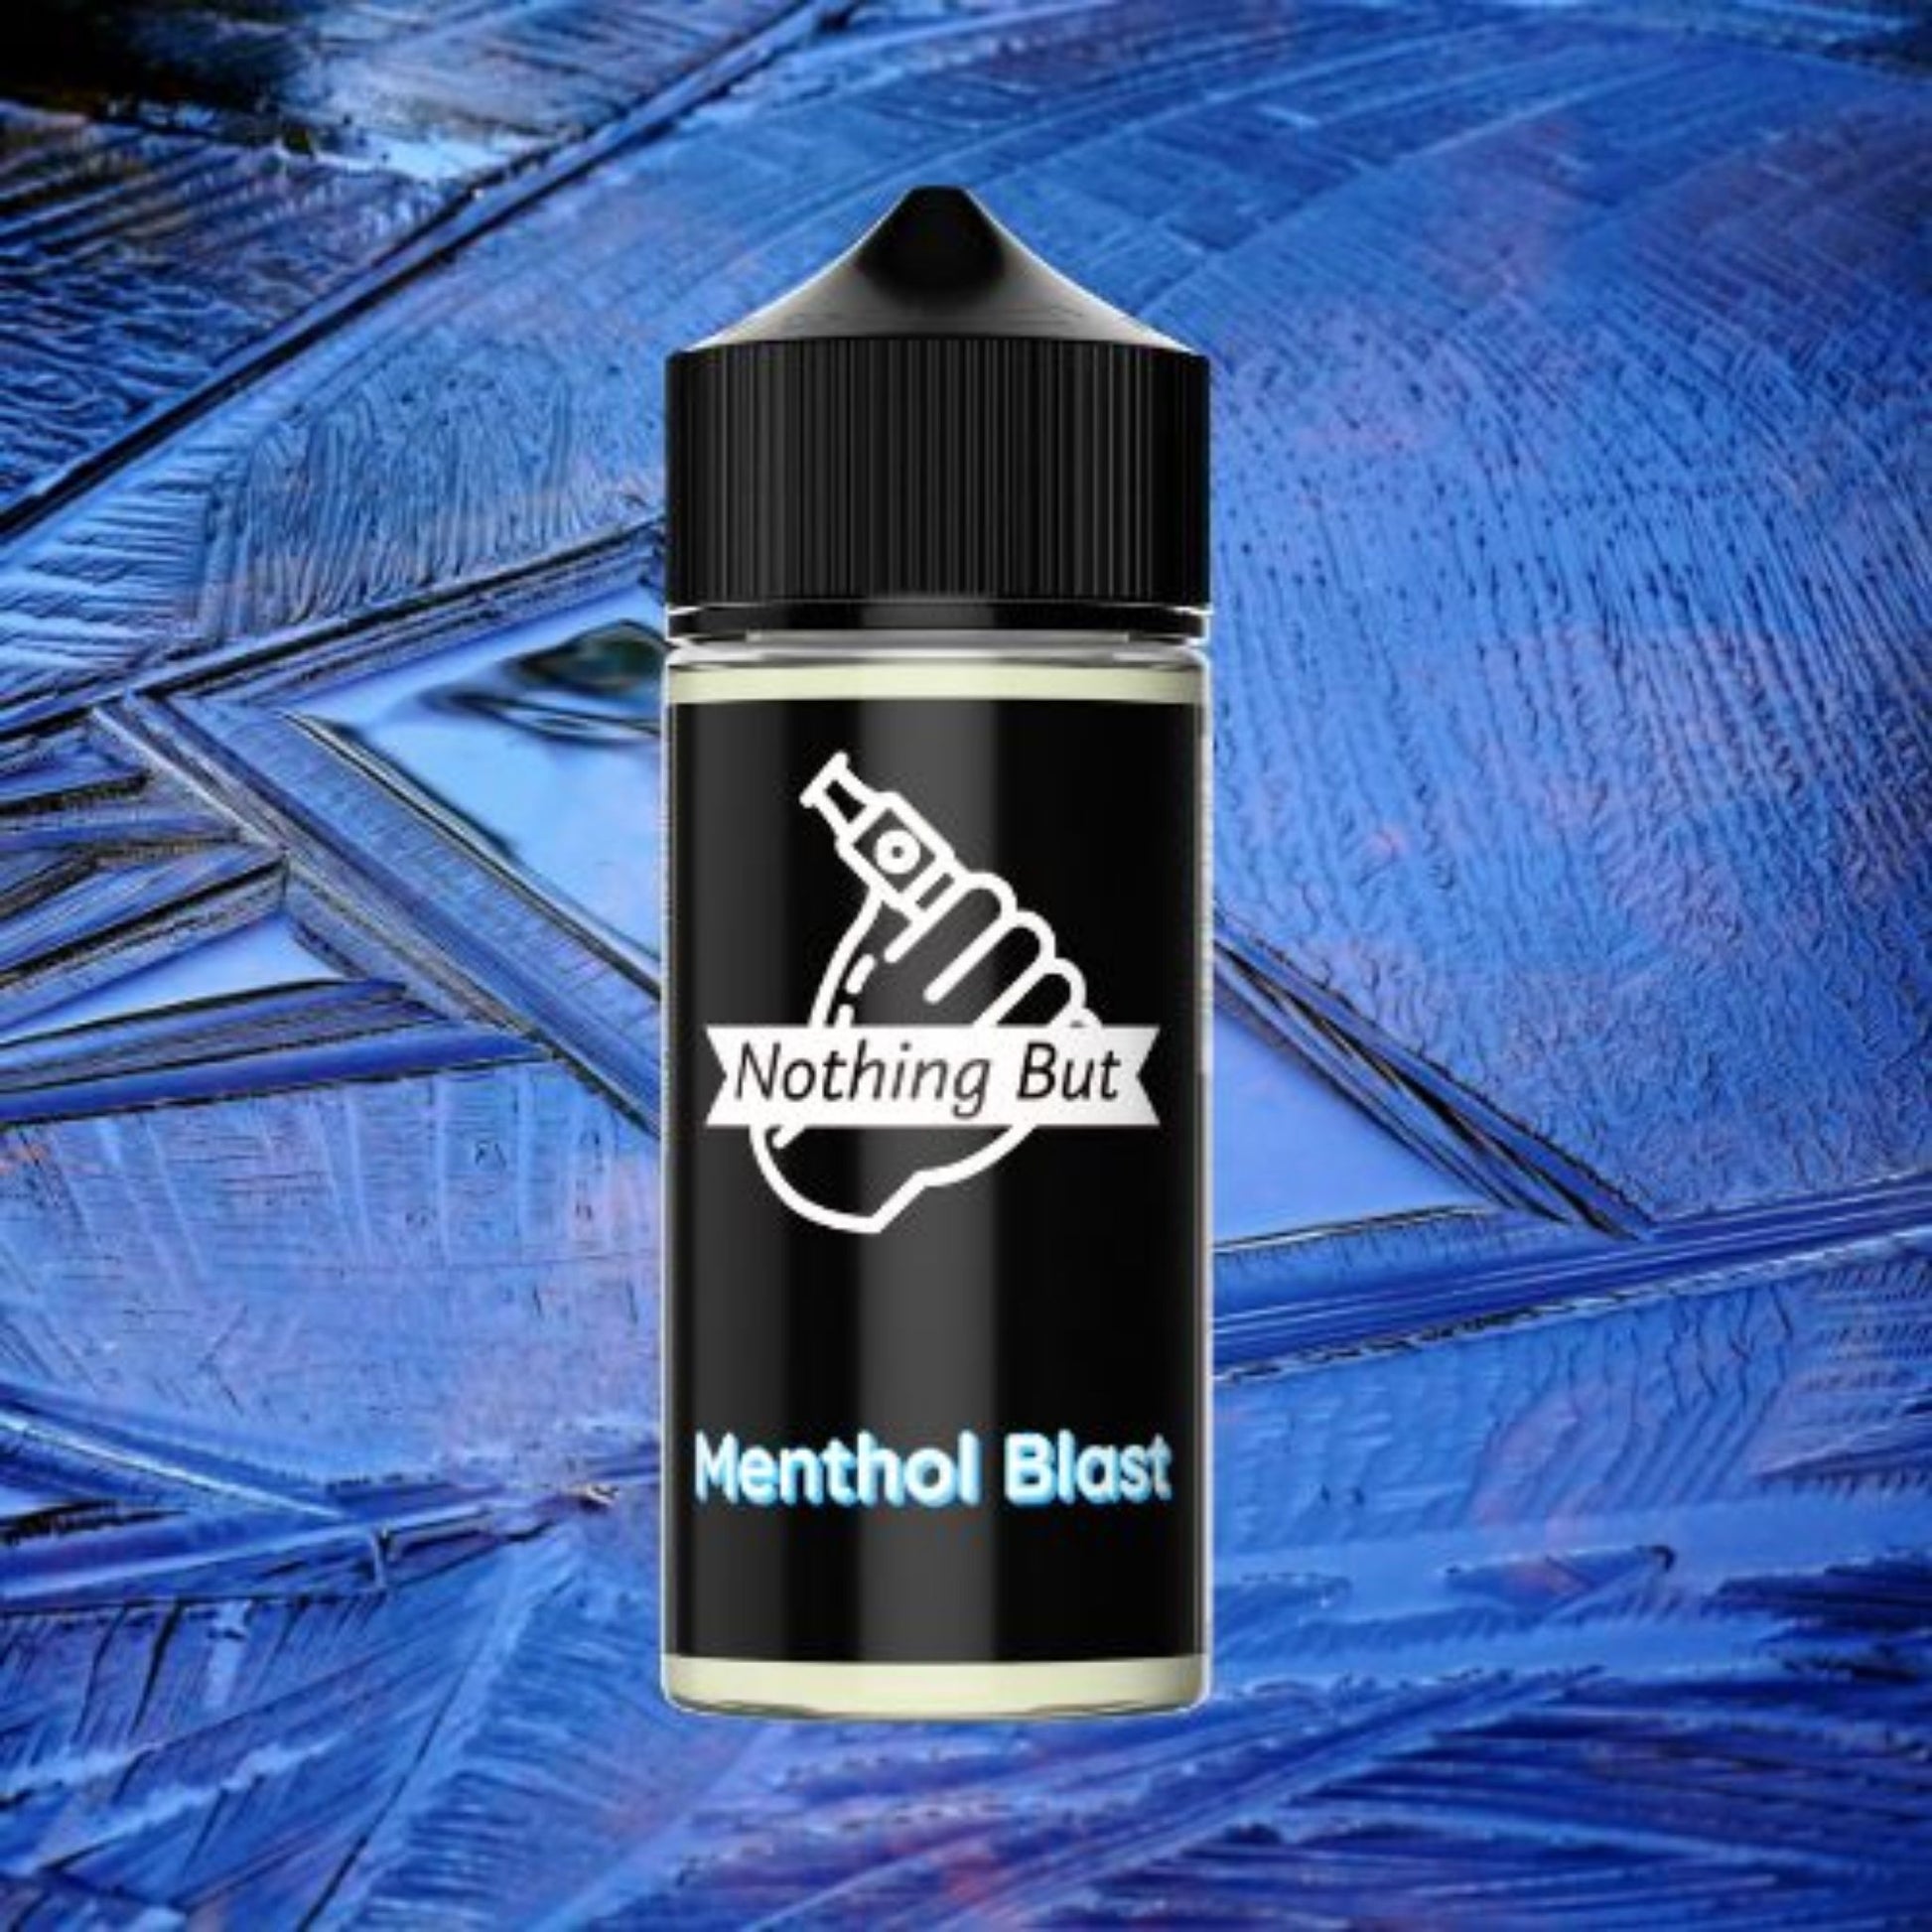 Nothing But | Menthol Blast | 120ml bottle with icy background